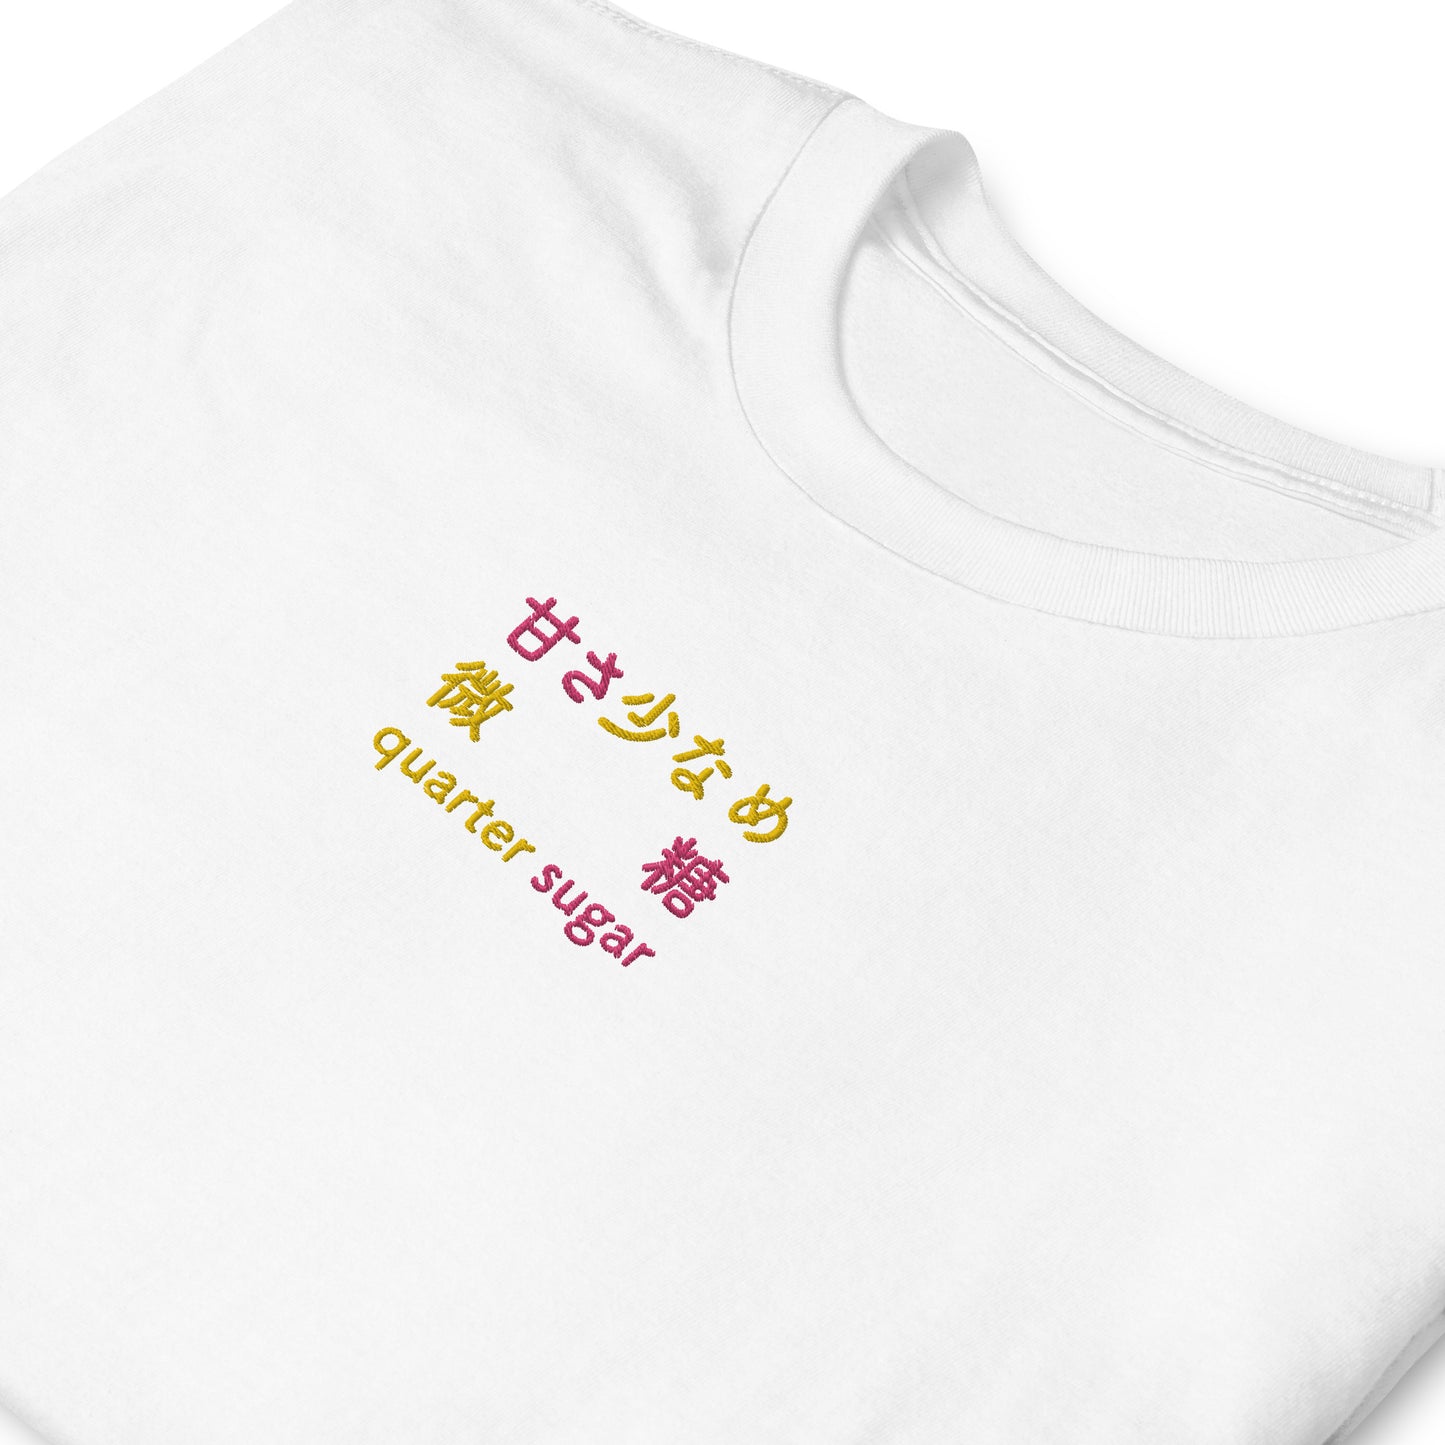 White High Quality Tee - Front Design with an Yellow, Pink Embroidery "Quarter Sugar" in Japanese,Chinese and English